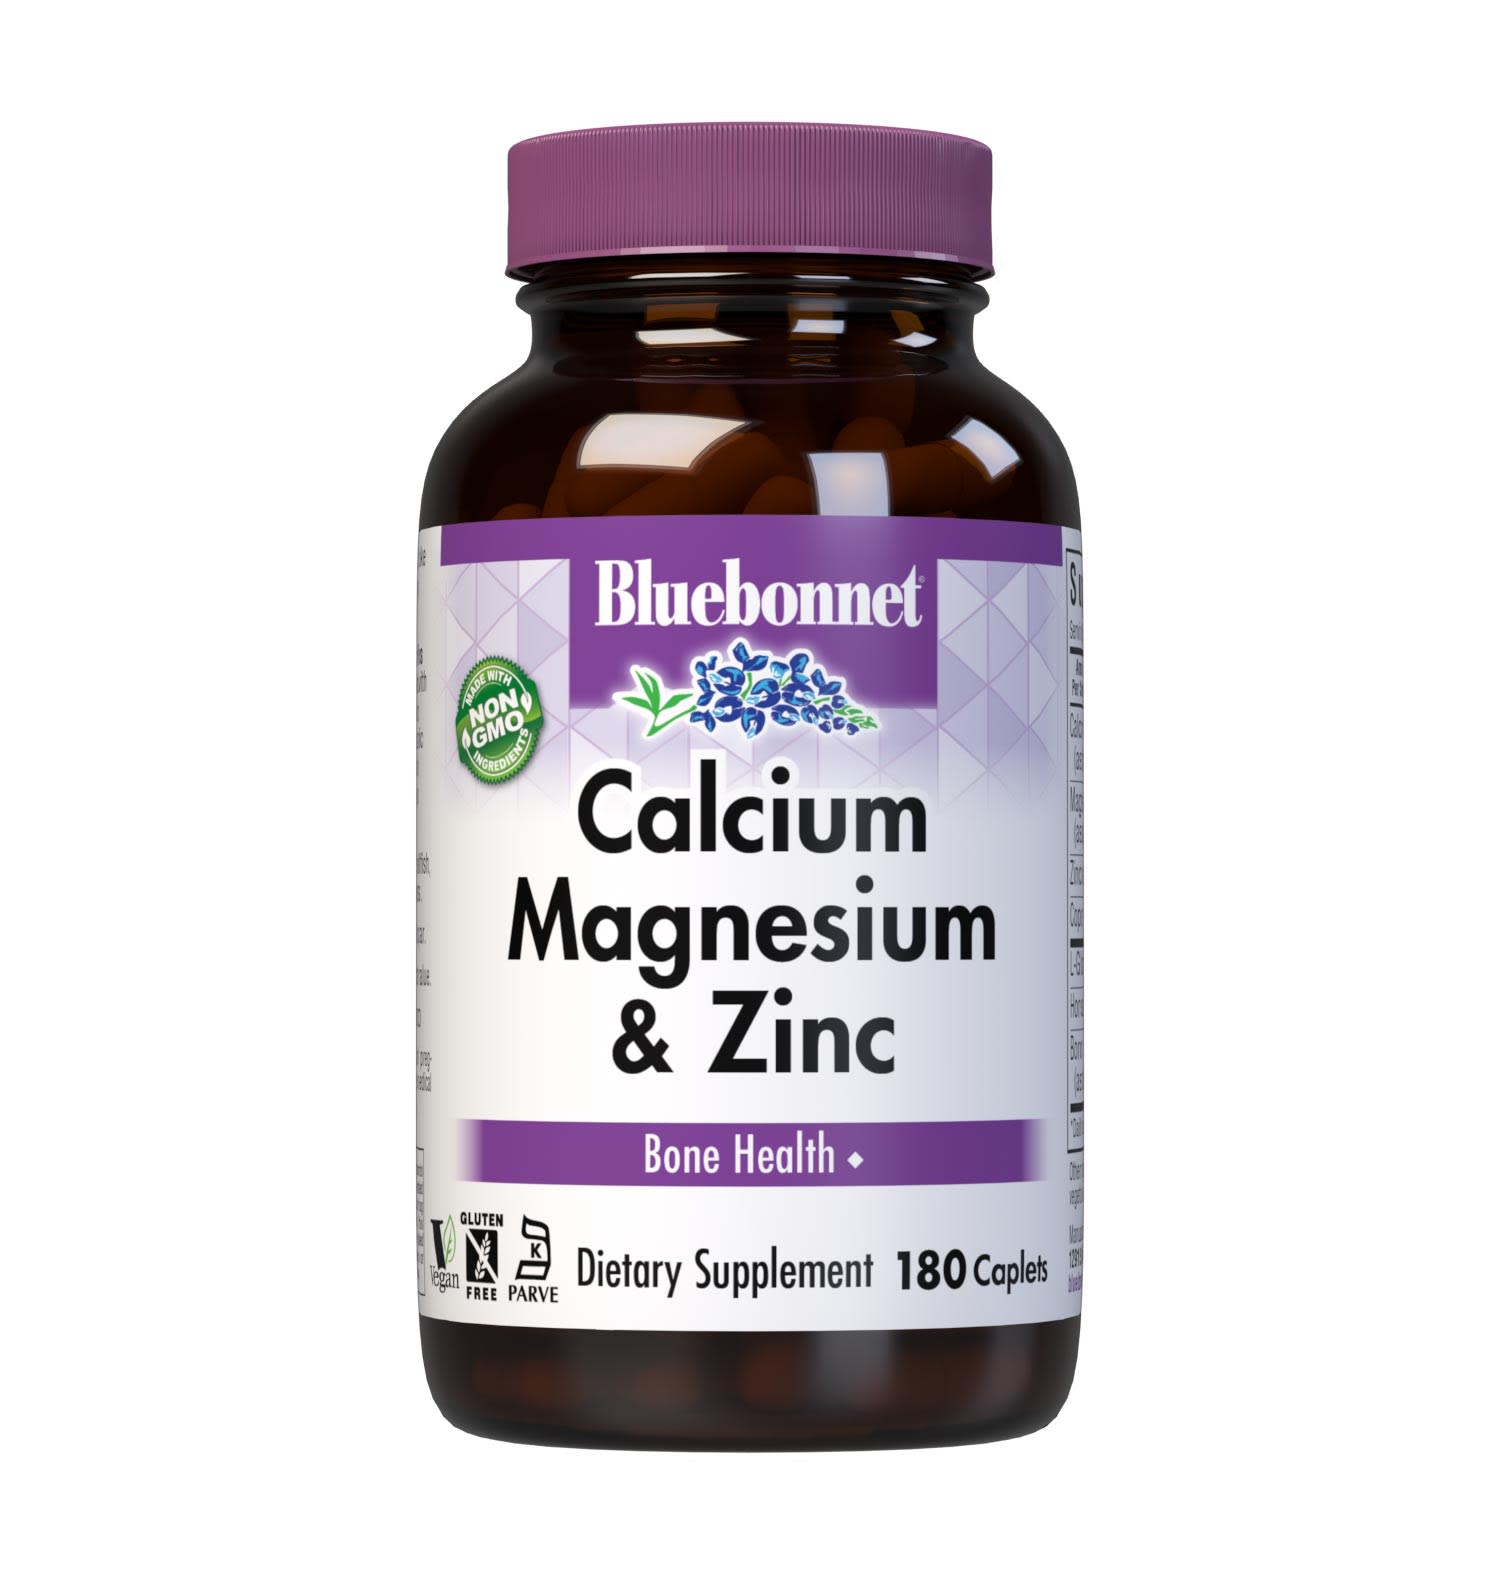 Bluebonnet's Calcium Magnesium & Zinc 180 Caplets are formulated with a combination of calcium, magnesium, zinc, copper and boron along with L-glutamic acid and horsetail powder for strong, healthy bones. #size_180 count